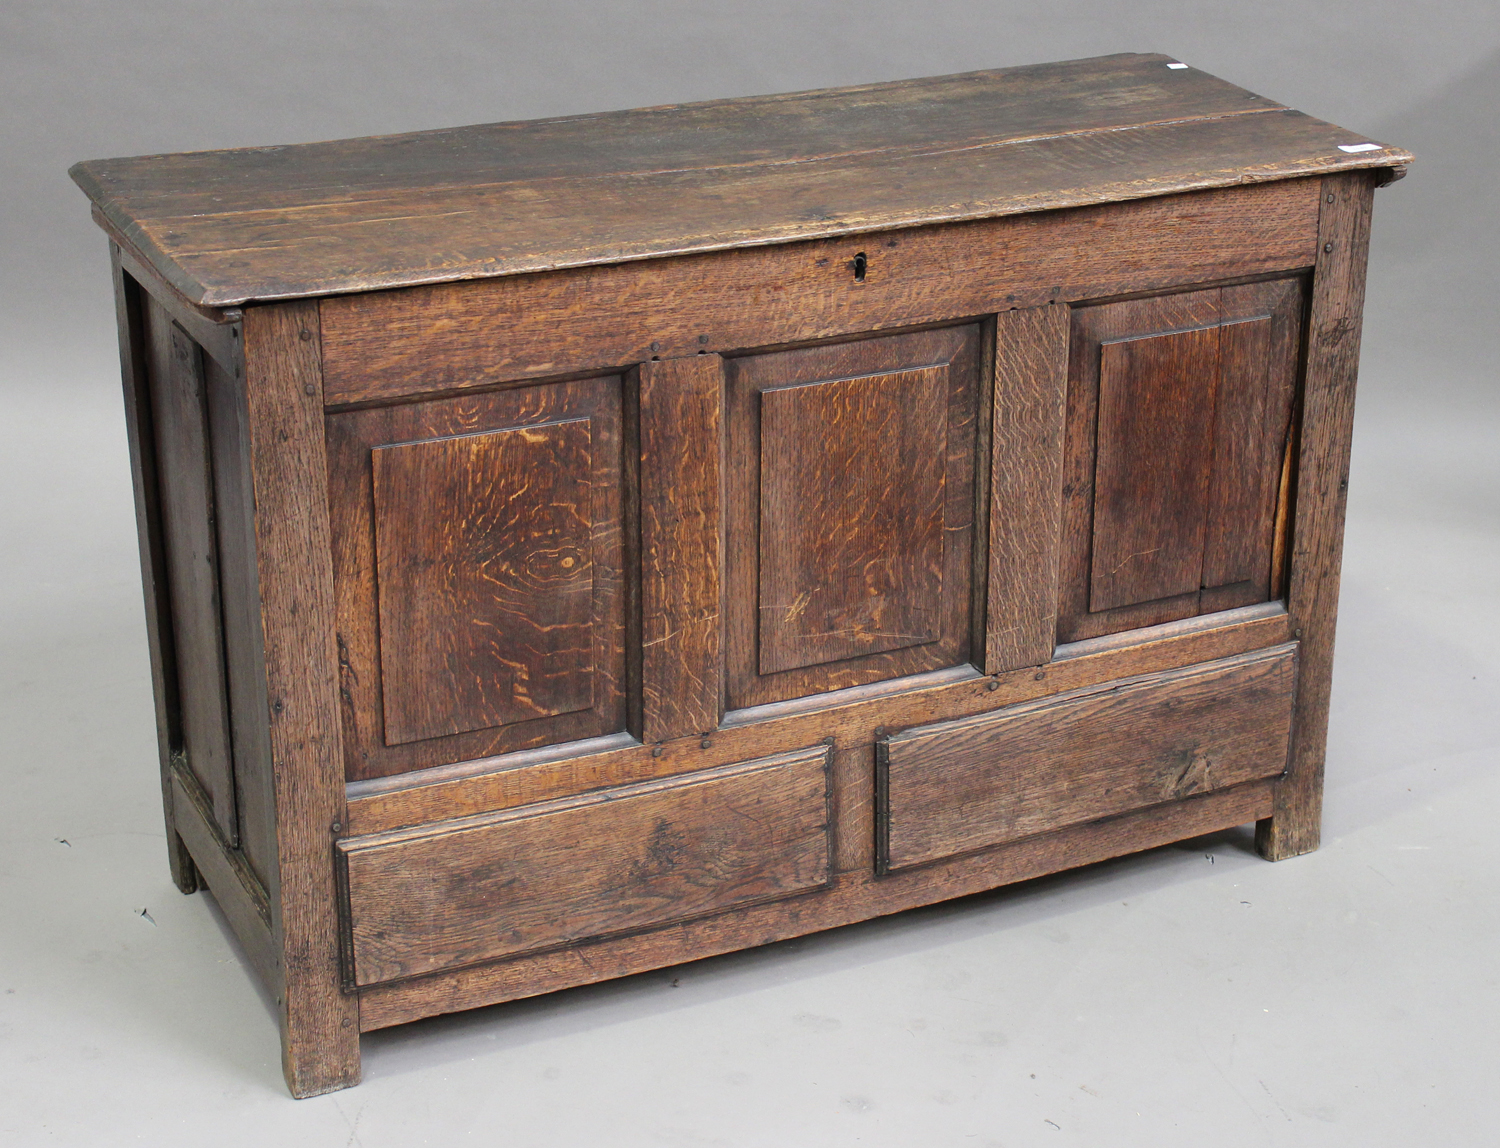 An 18th century oak panelled coffer, the hinged lid raised on stile supports, height 75cm, width